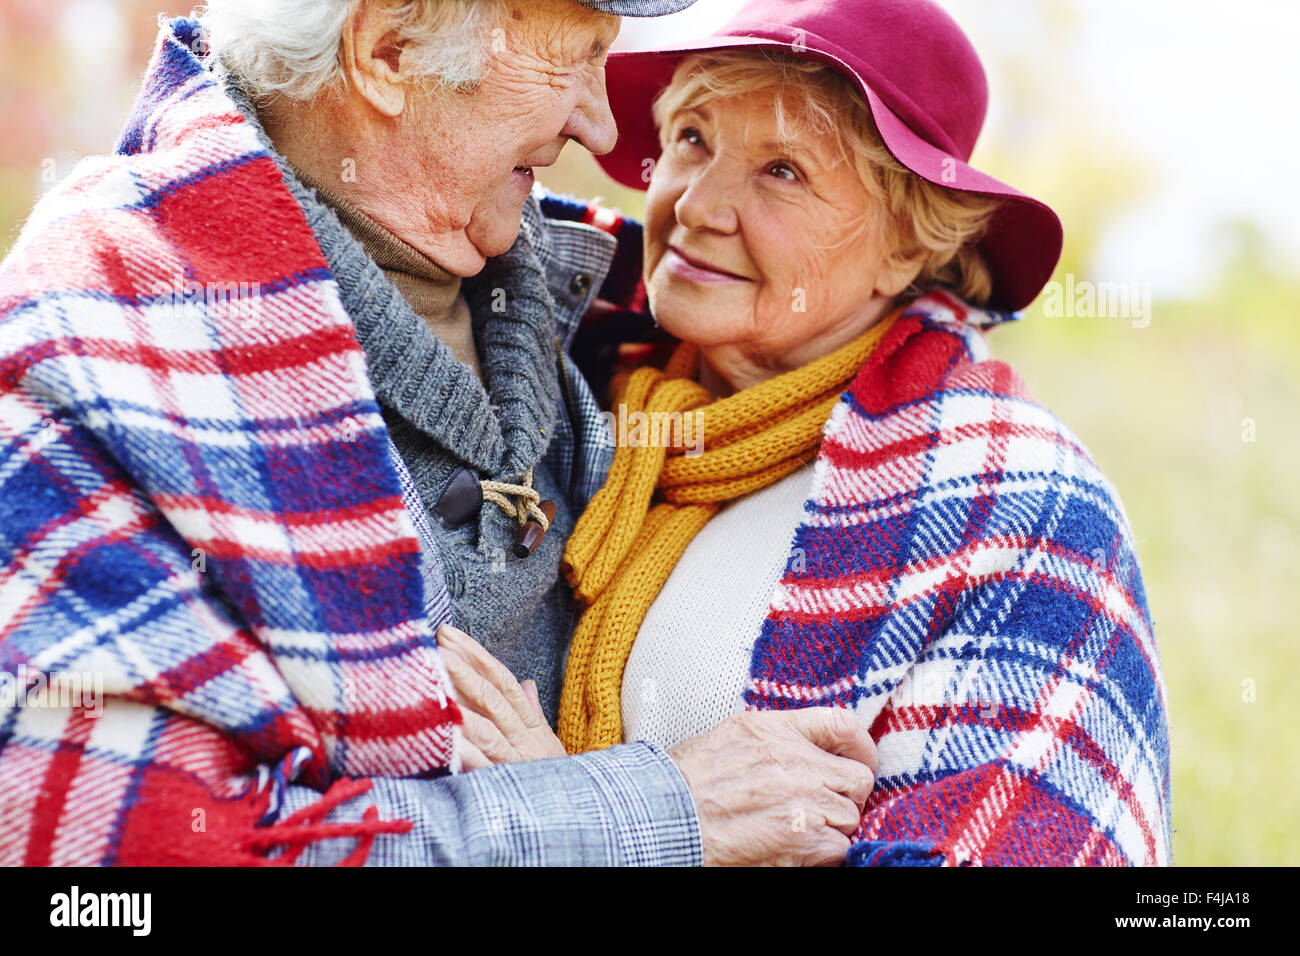 Retired couple in embrace looking at one another Stock Photo